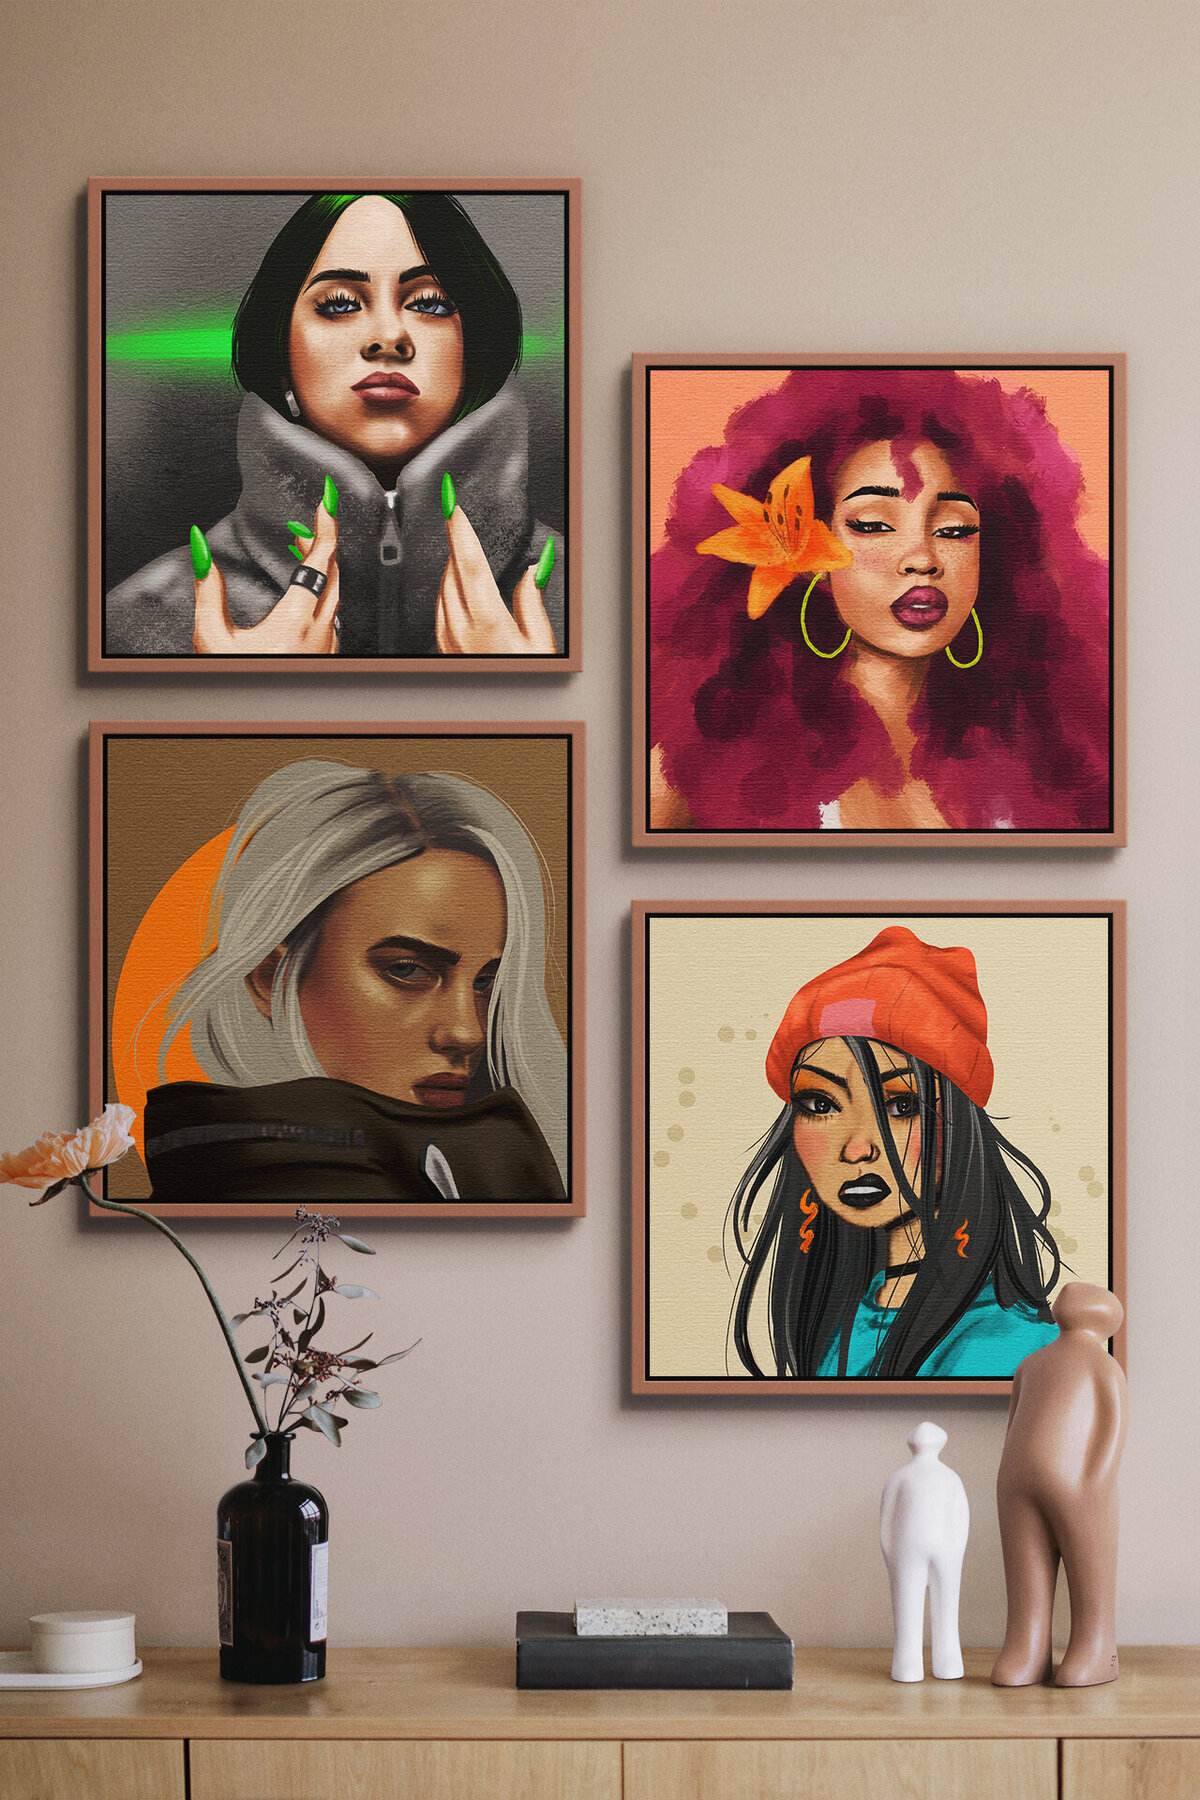 Four paintings, two are Billie Eilish and two are girls with amazing hair